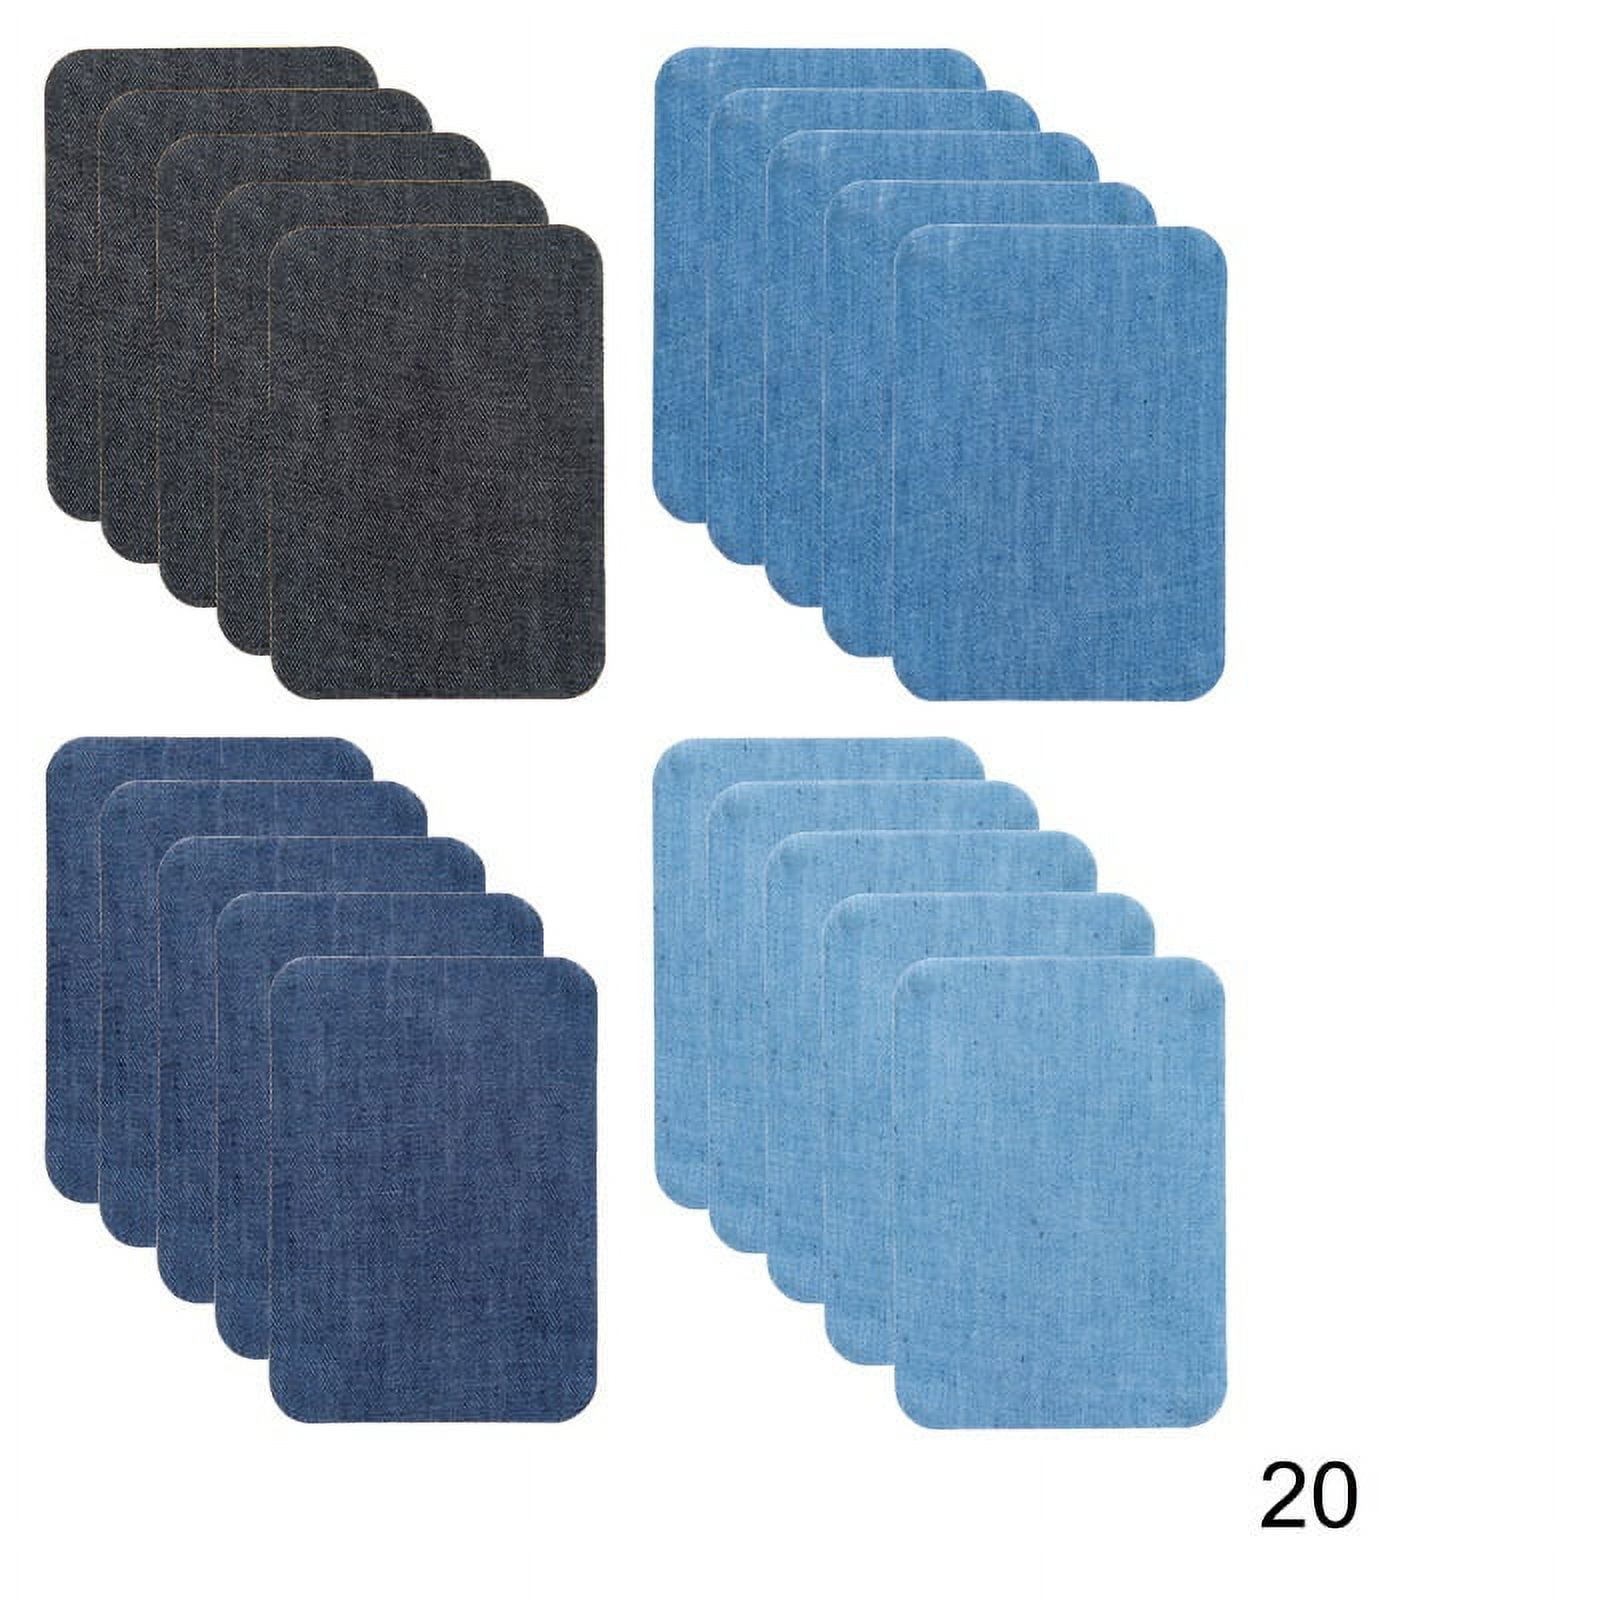 Dtydtpe Jeans Patch Denim Iron on Jean Patches Inside & Outside Strongest Glue Assorted Shades of Blue Repair Decorating 2.75 inch